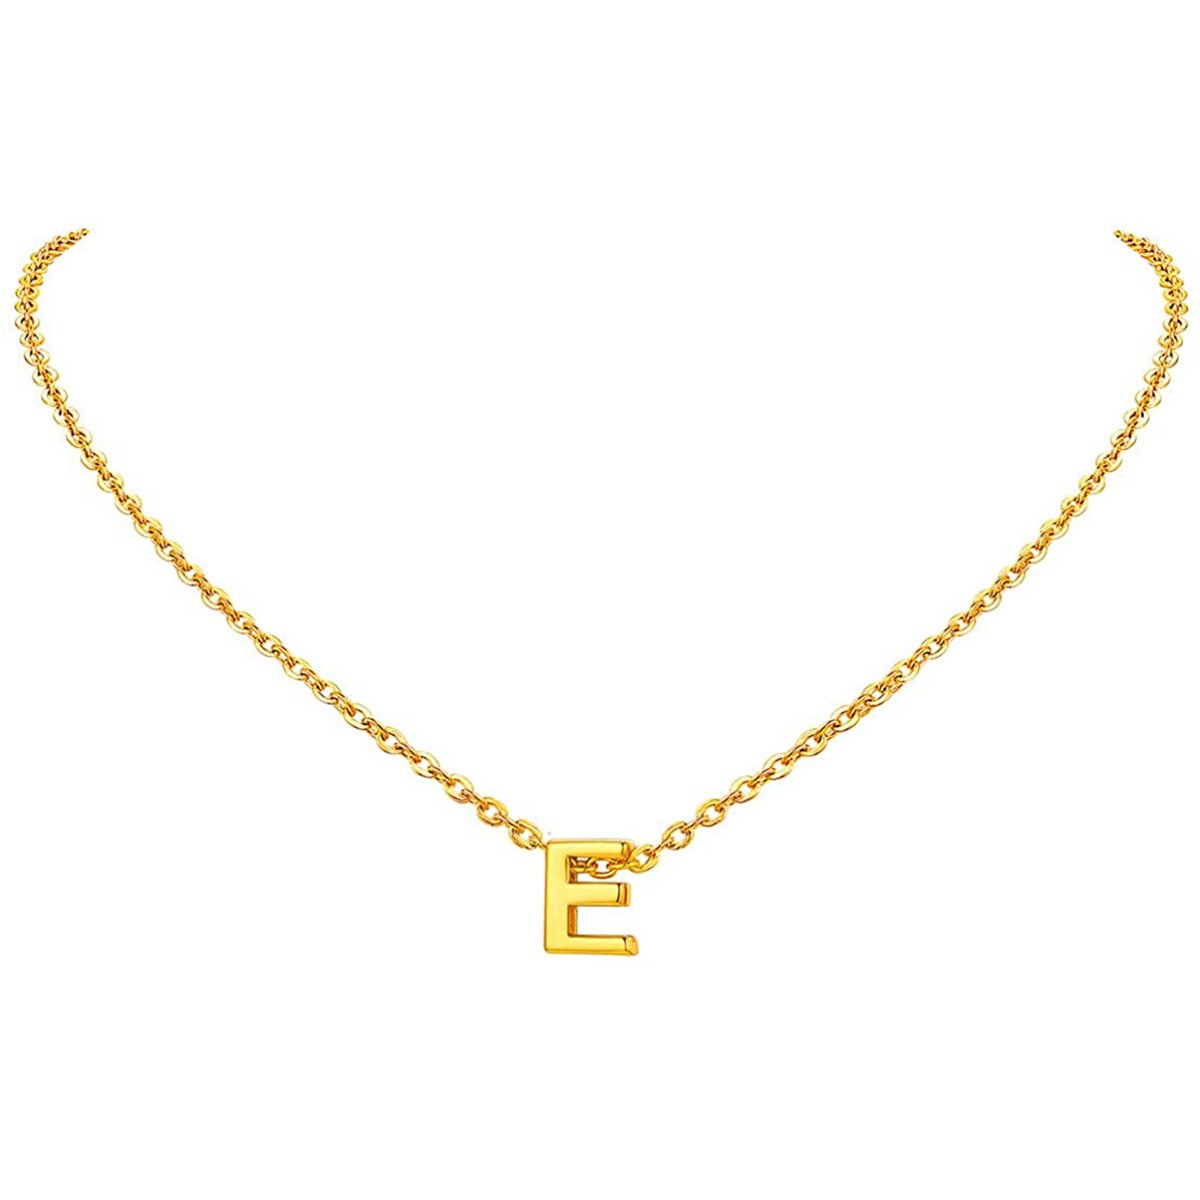 Personalized crown initial E necklace in cz gold plating -